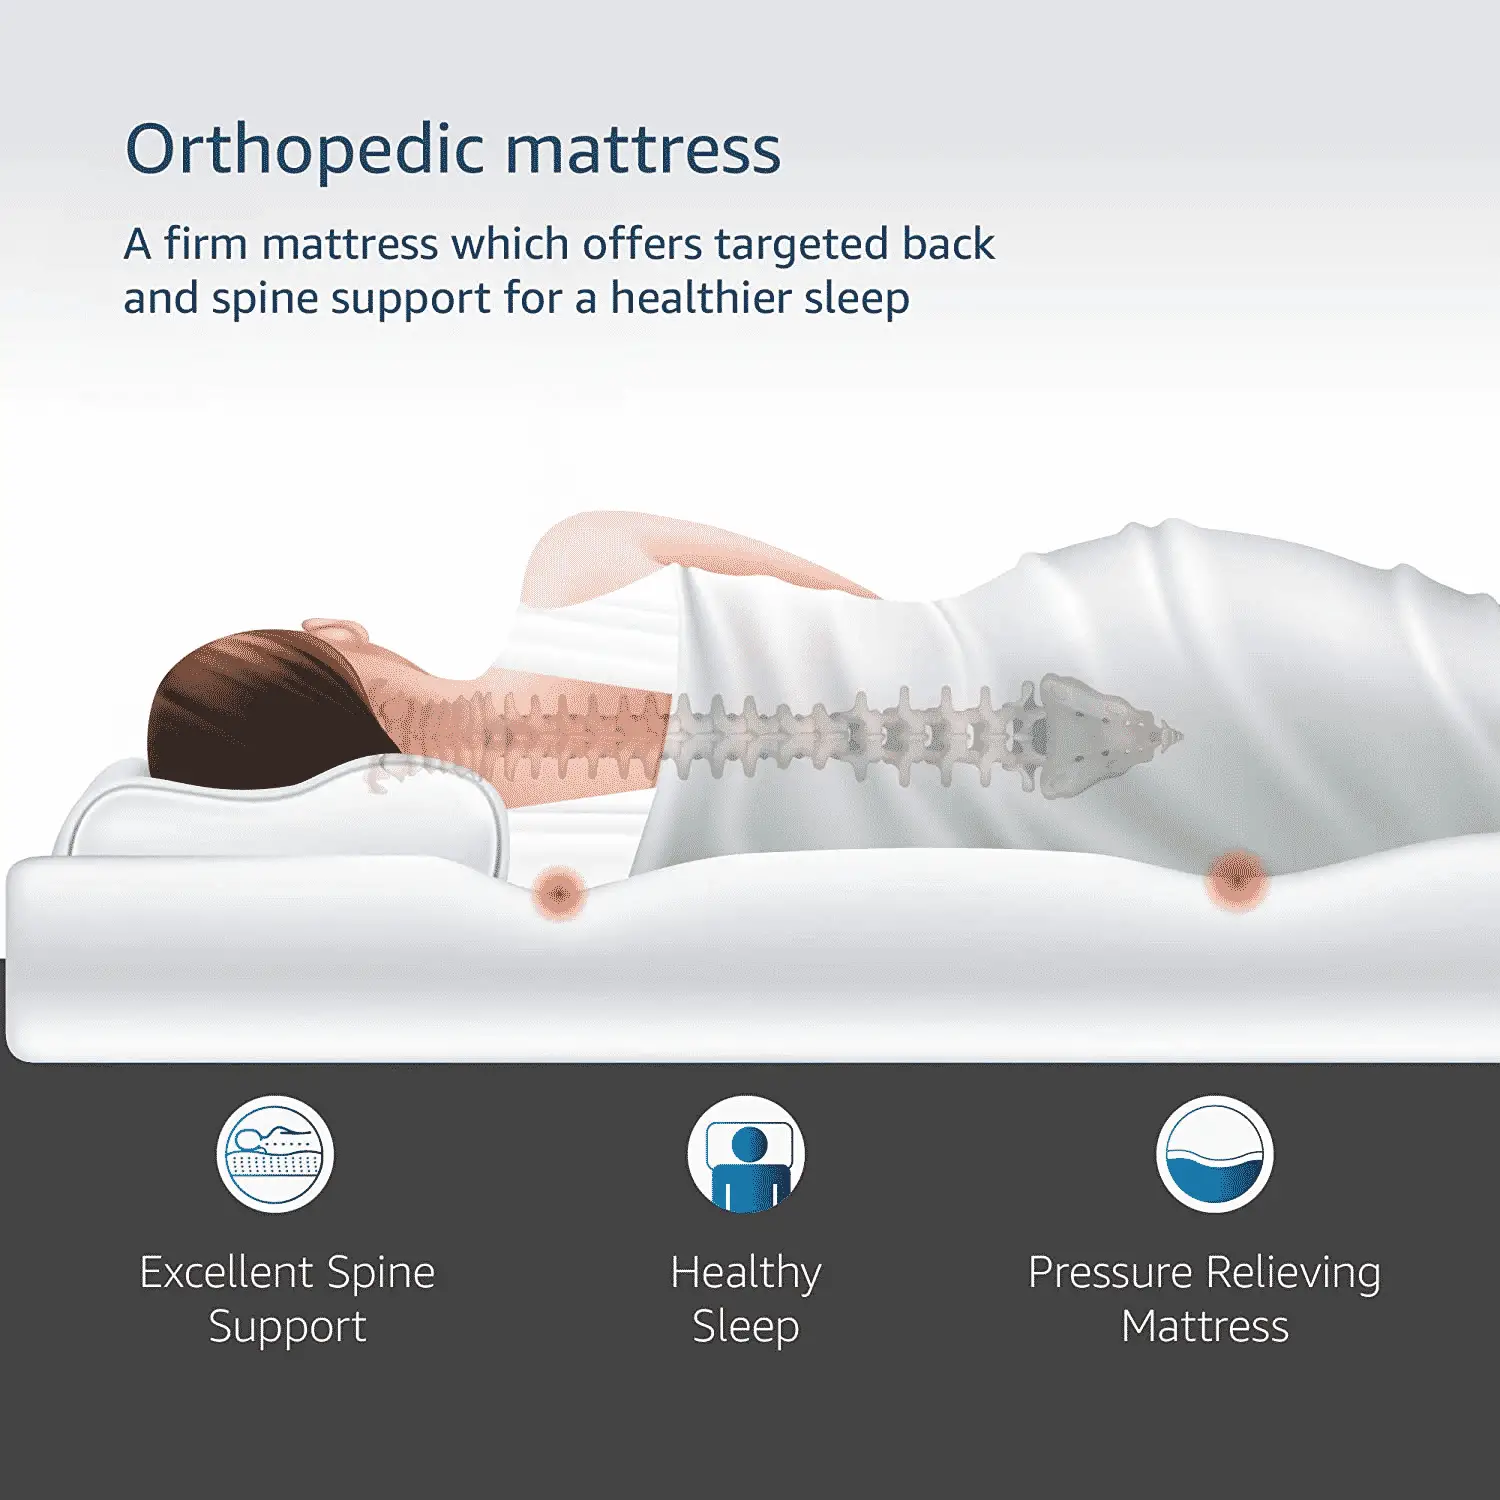 Will Medicare Pay For An Orthopedic Mattress? Steps to Get Medicare ...